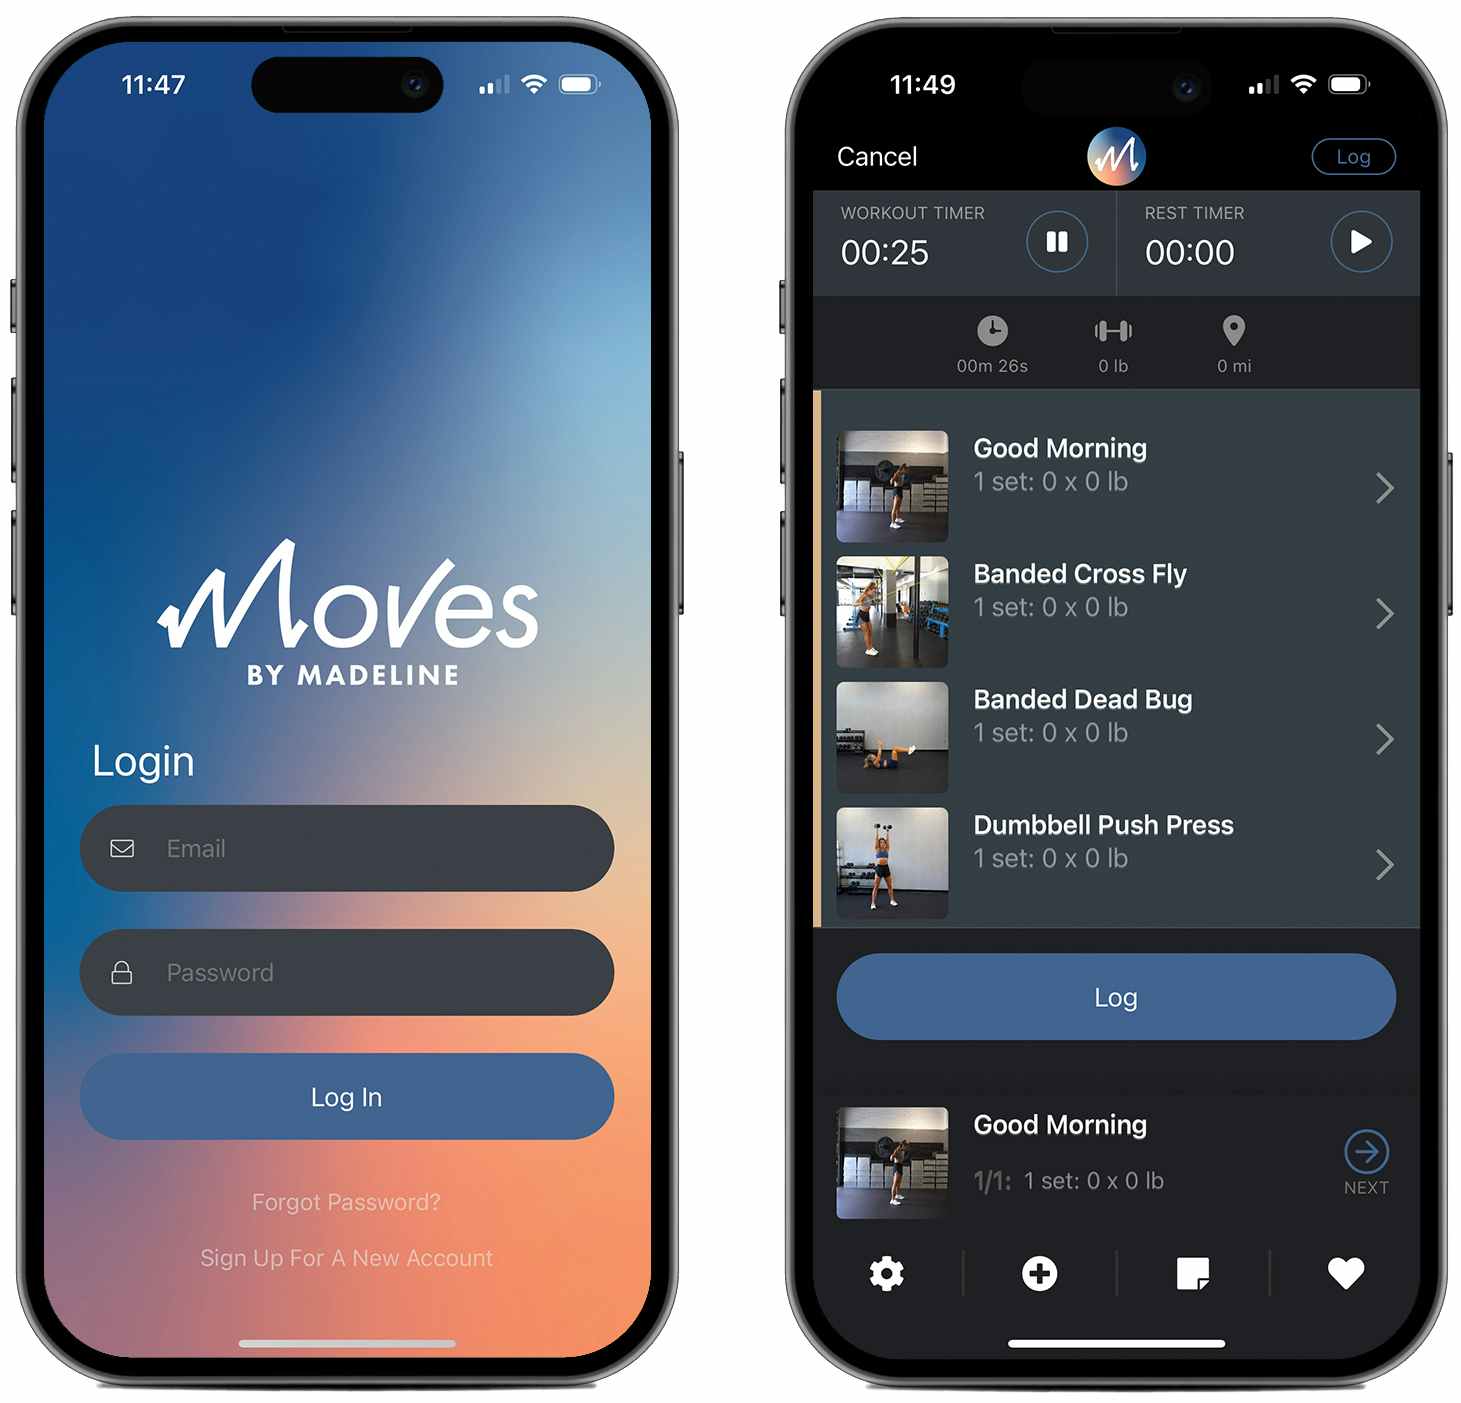 Screenshots from the Moves by Madeline fitness app on two iPhone screens